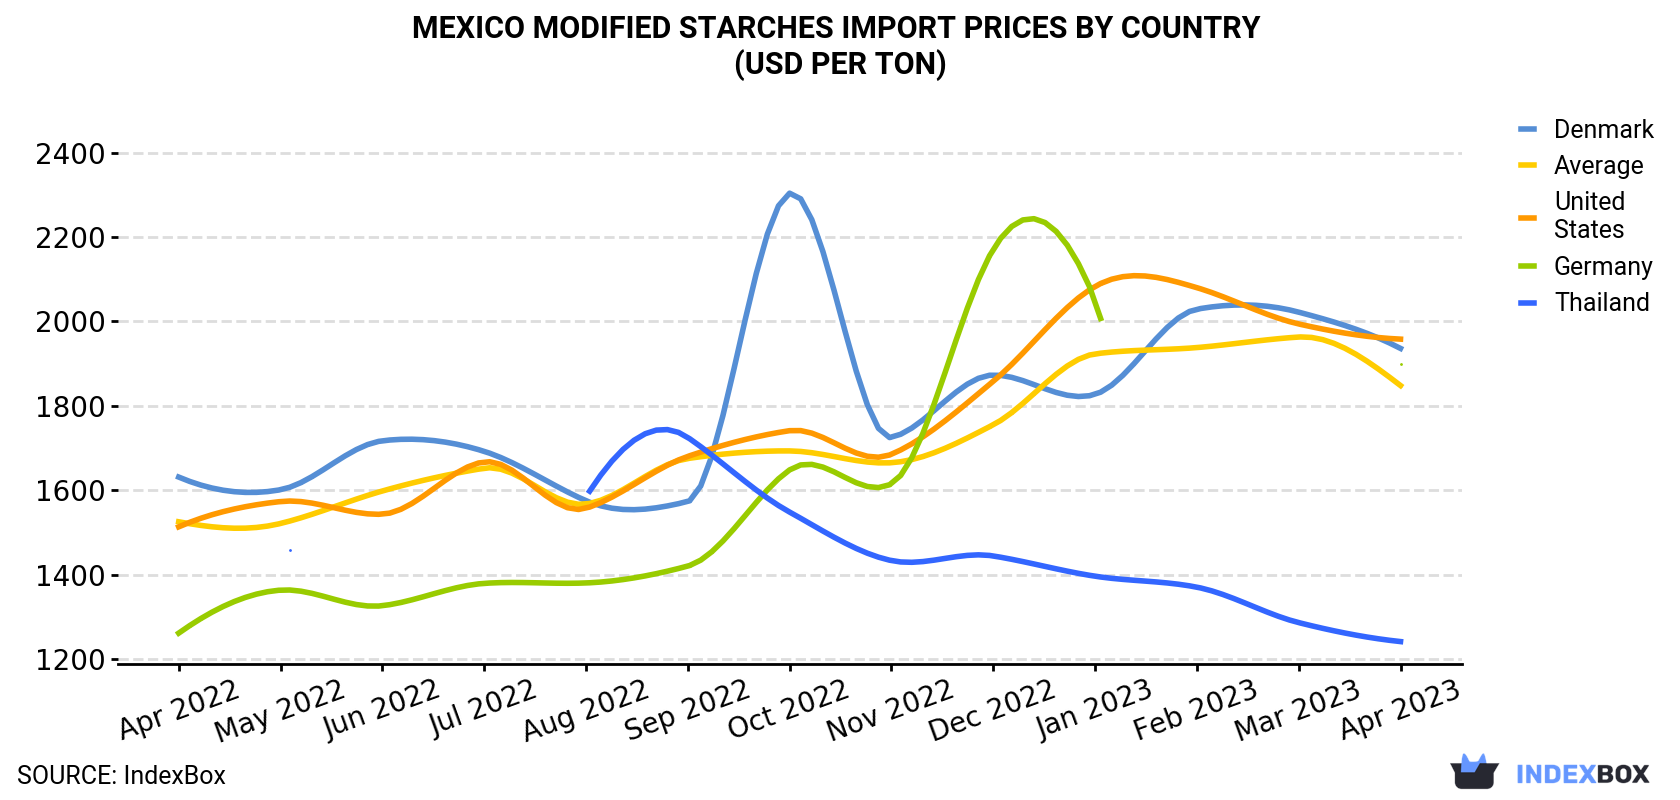 Mexico Modified Starches Import Prices By Country (USD Per Ton)